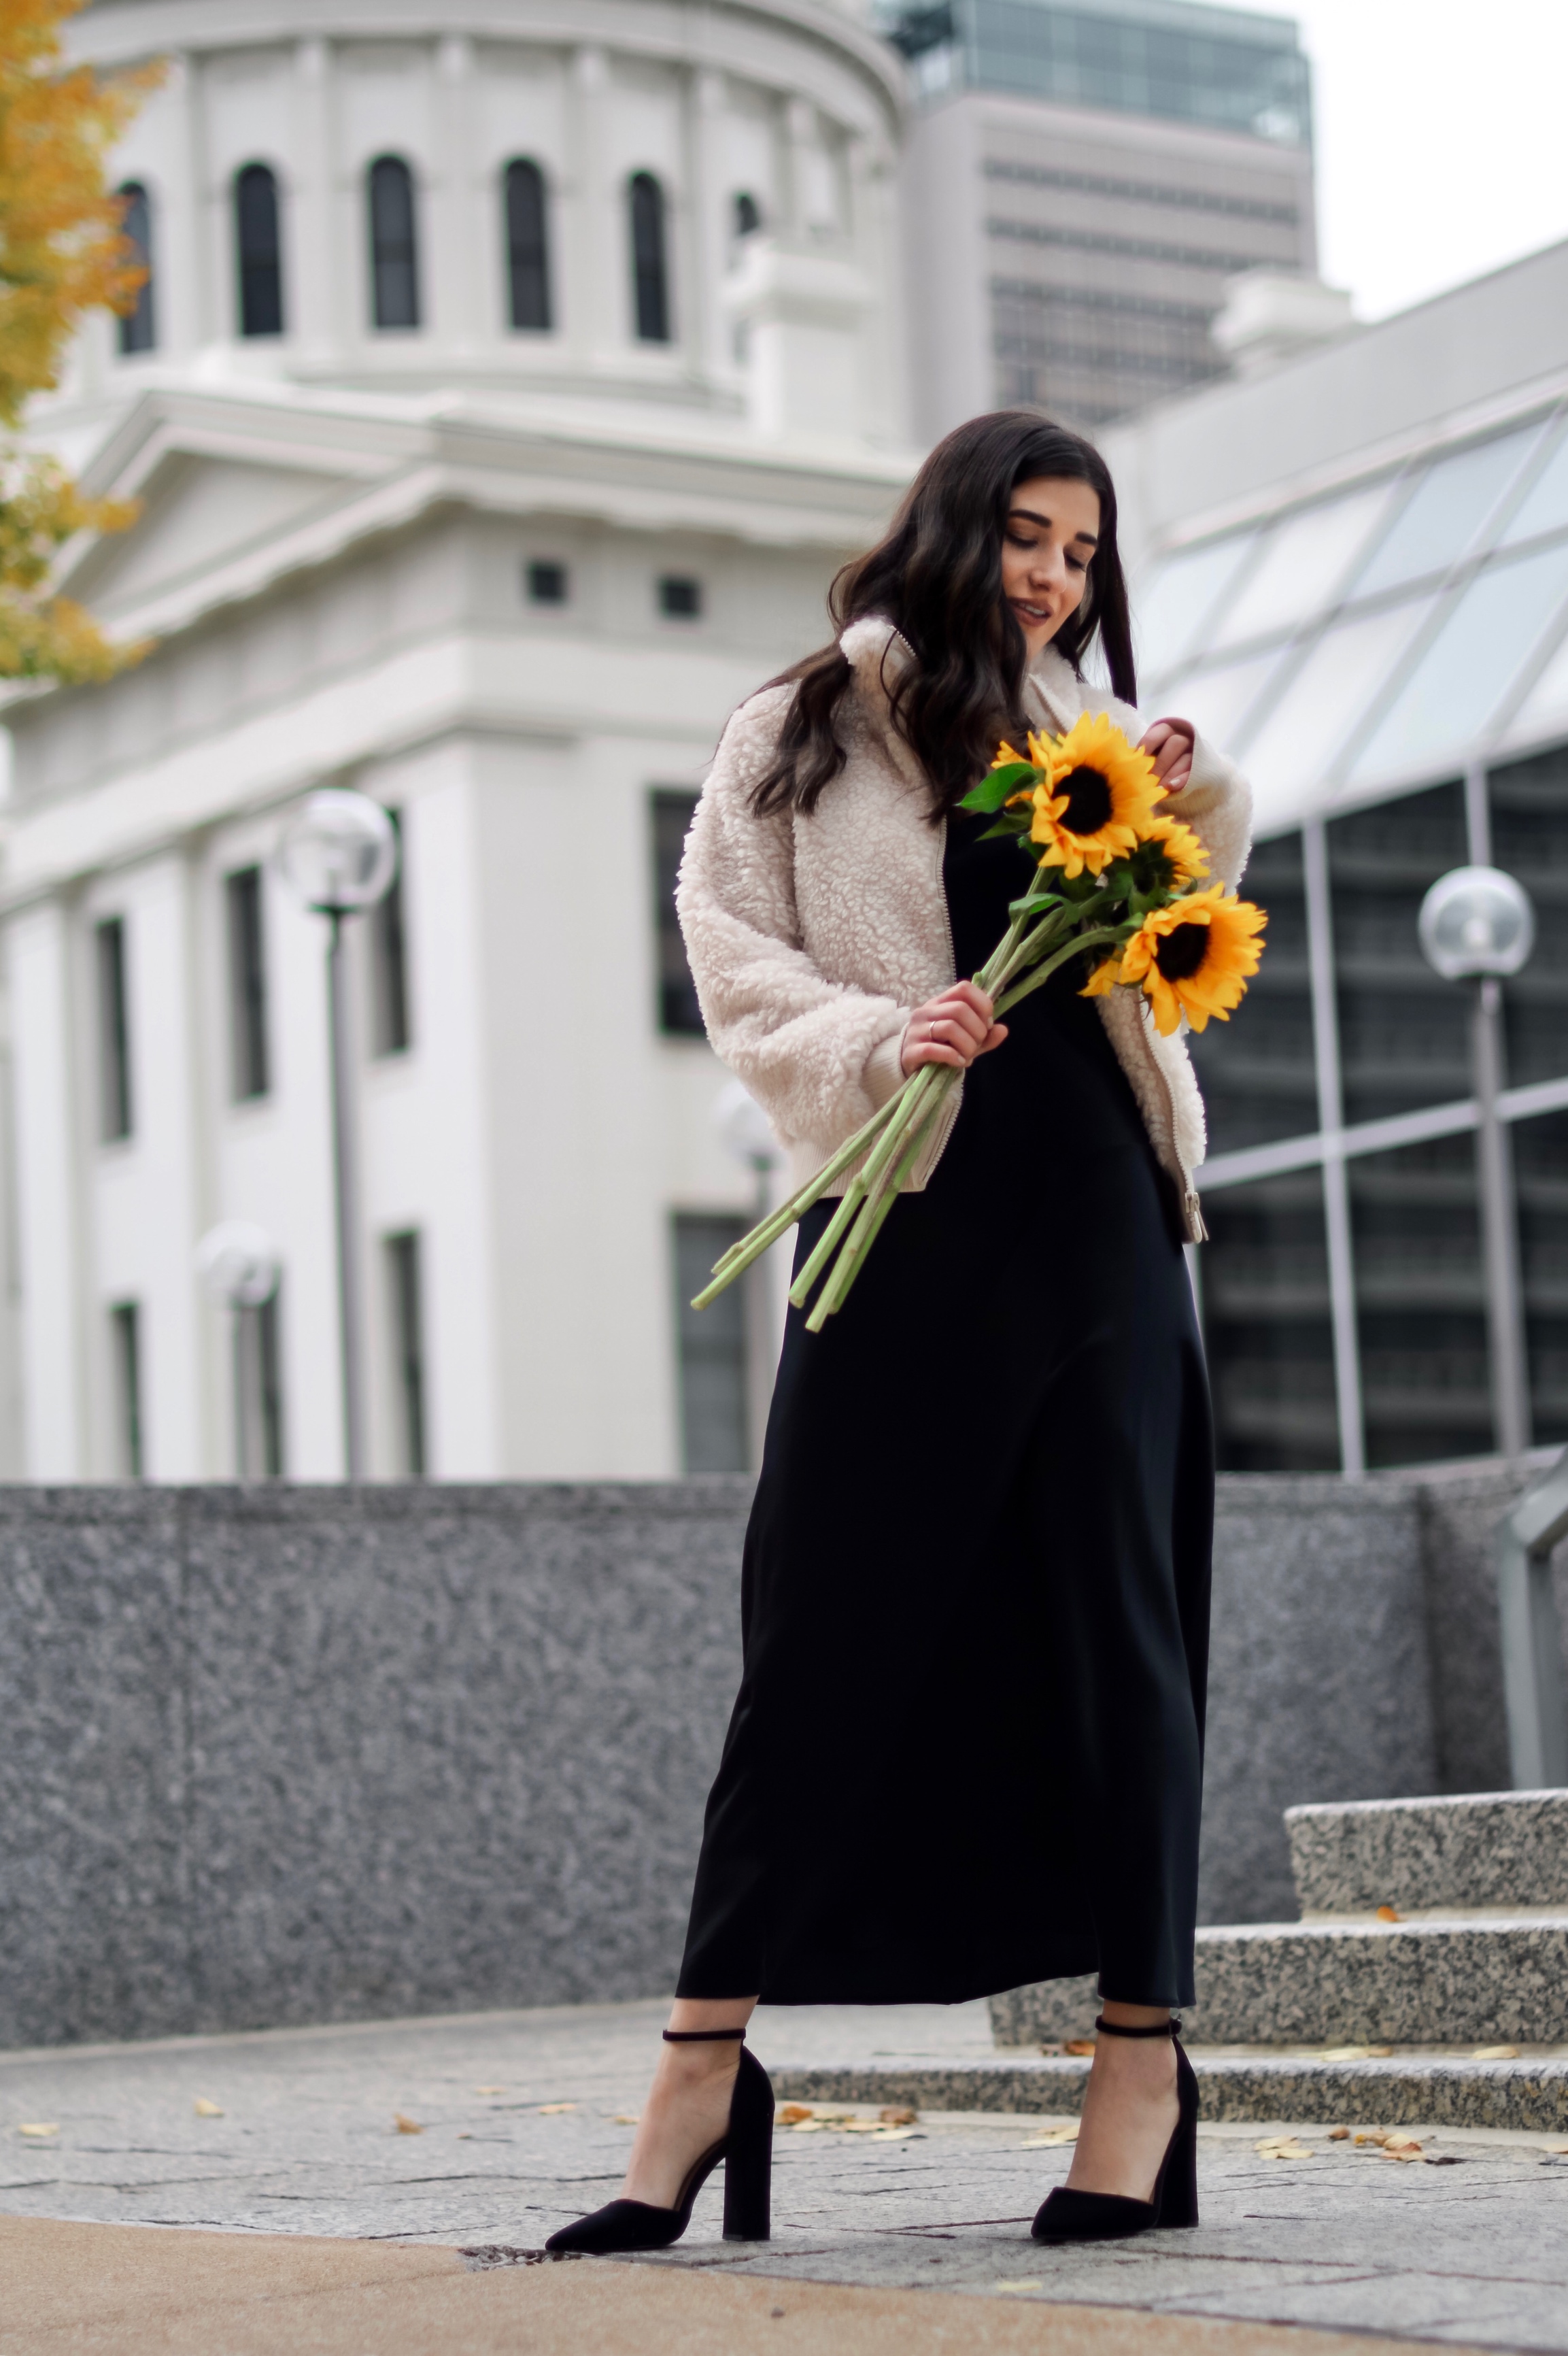 The 10 Most Frustrating Parts Of Brand Collabs Long Black Slip Dress Shearling Jacket Esther Santer Fashion Blog NYC Street Style Blogger Outfit OOTD Trendy Shopping St. Louis Photoshoot Hometown Downtown Saint Louis  Sunflowers Yellow Flowers Heels.jpg